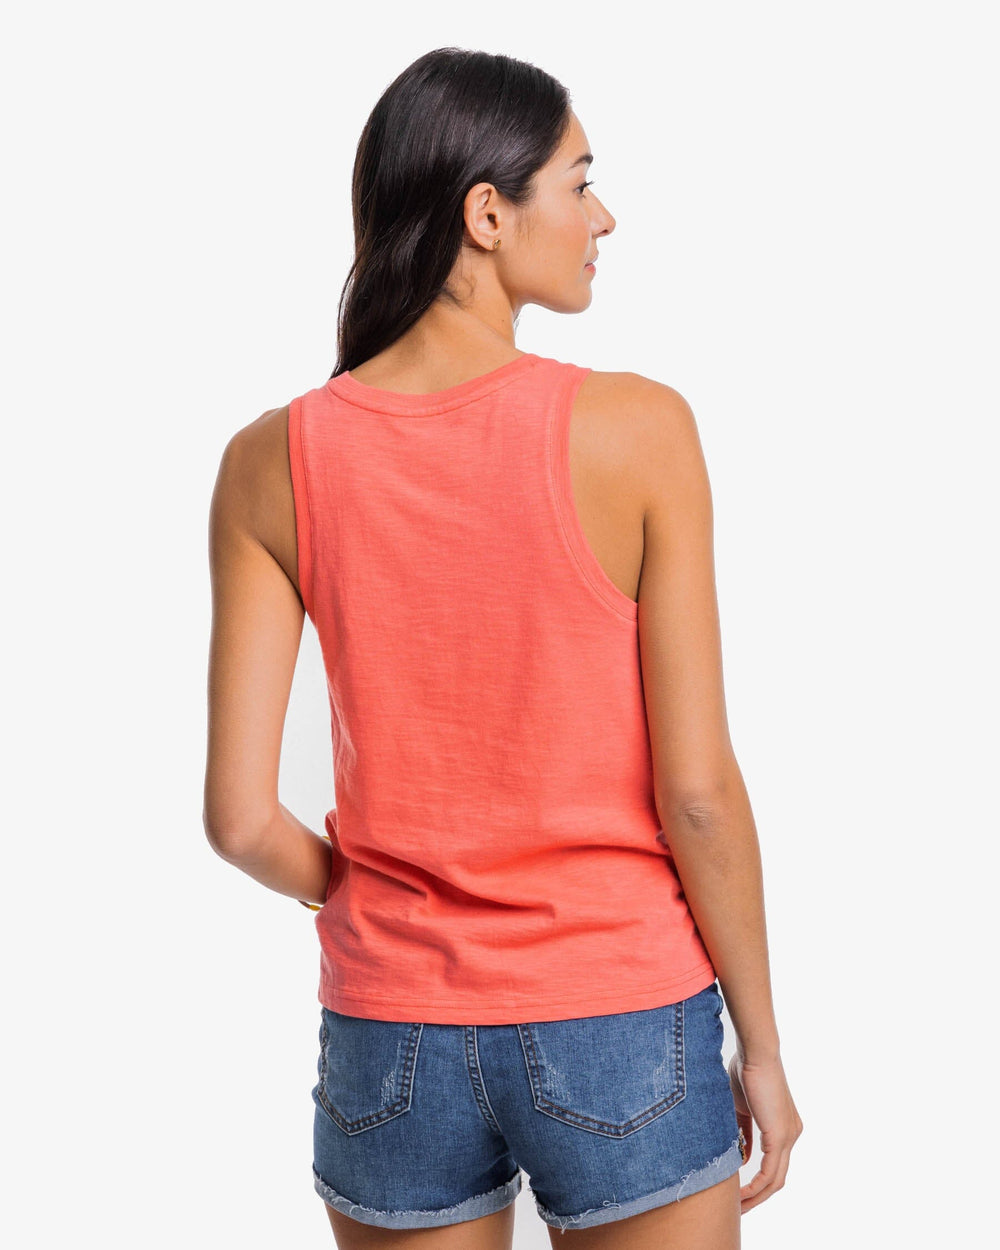 The back view of the Southern Tide Avah Sun Farer Tank by Southern Tide - Sunkist Coral